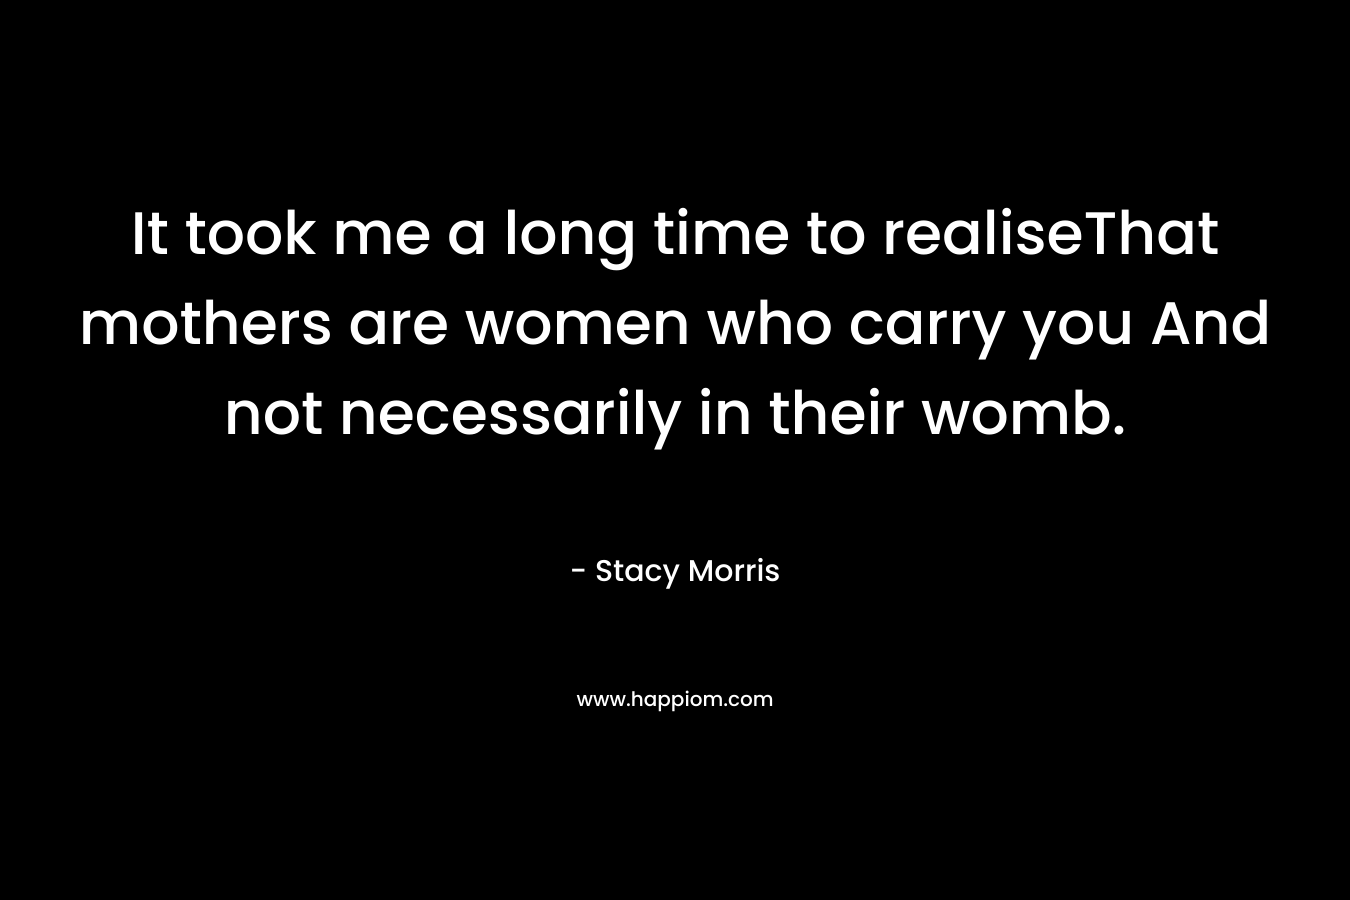 It took me a long time to realiseThat mothers are women who carry you And not necessarily in their womb.